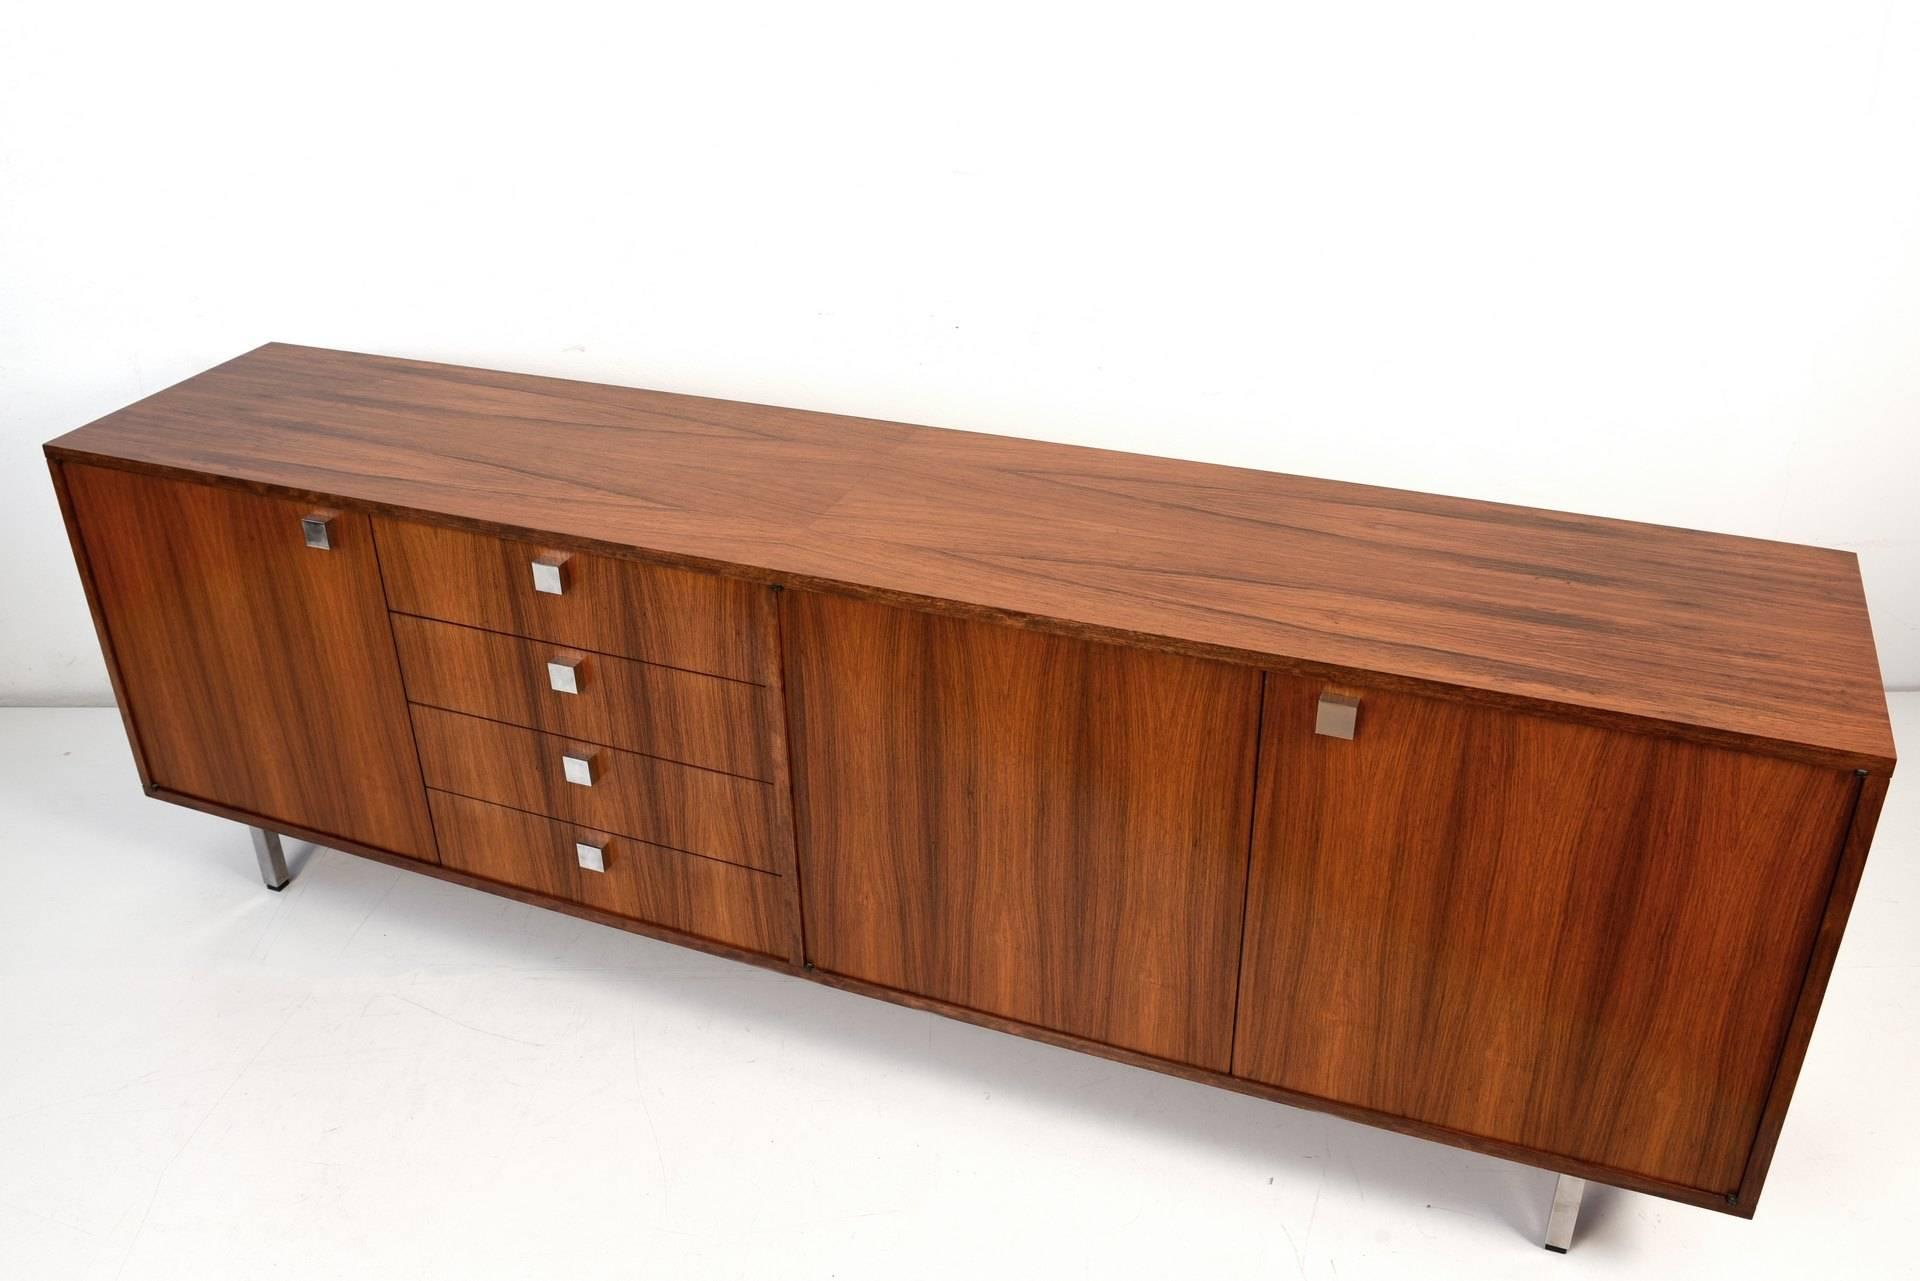 A vivid and decorative veneer picture is provided by this carefully produced cabinet furniture of the late 1960s. Charming details in geometric shapes are repeated in handles and base. Also the inside of the doors as well as the inlays have rosewood